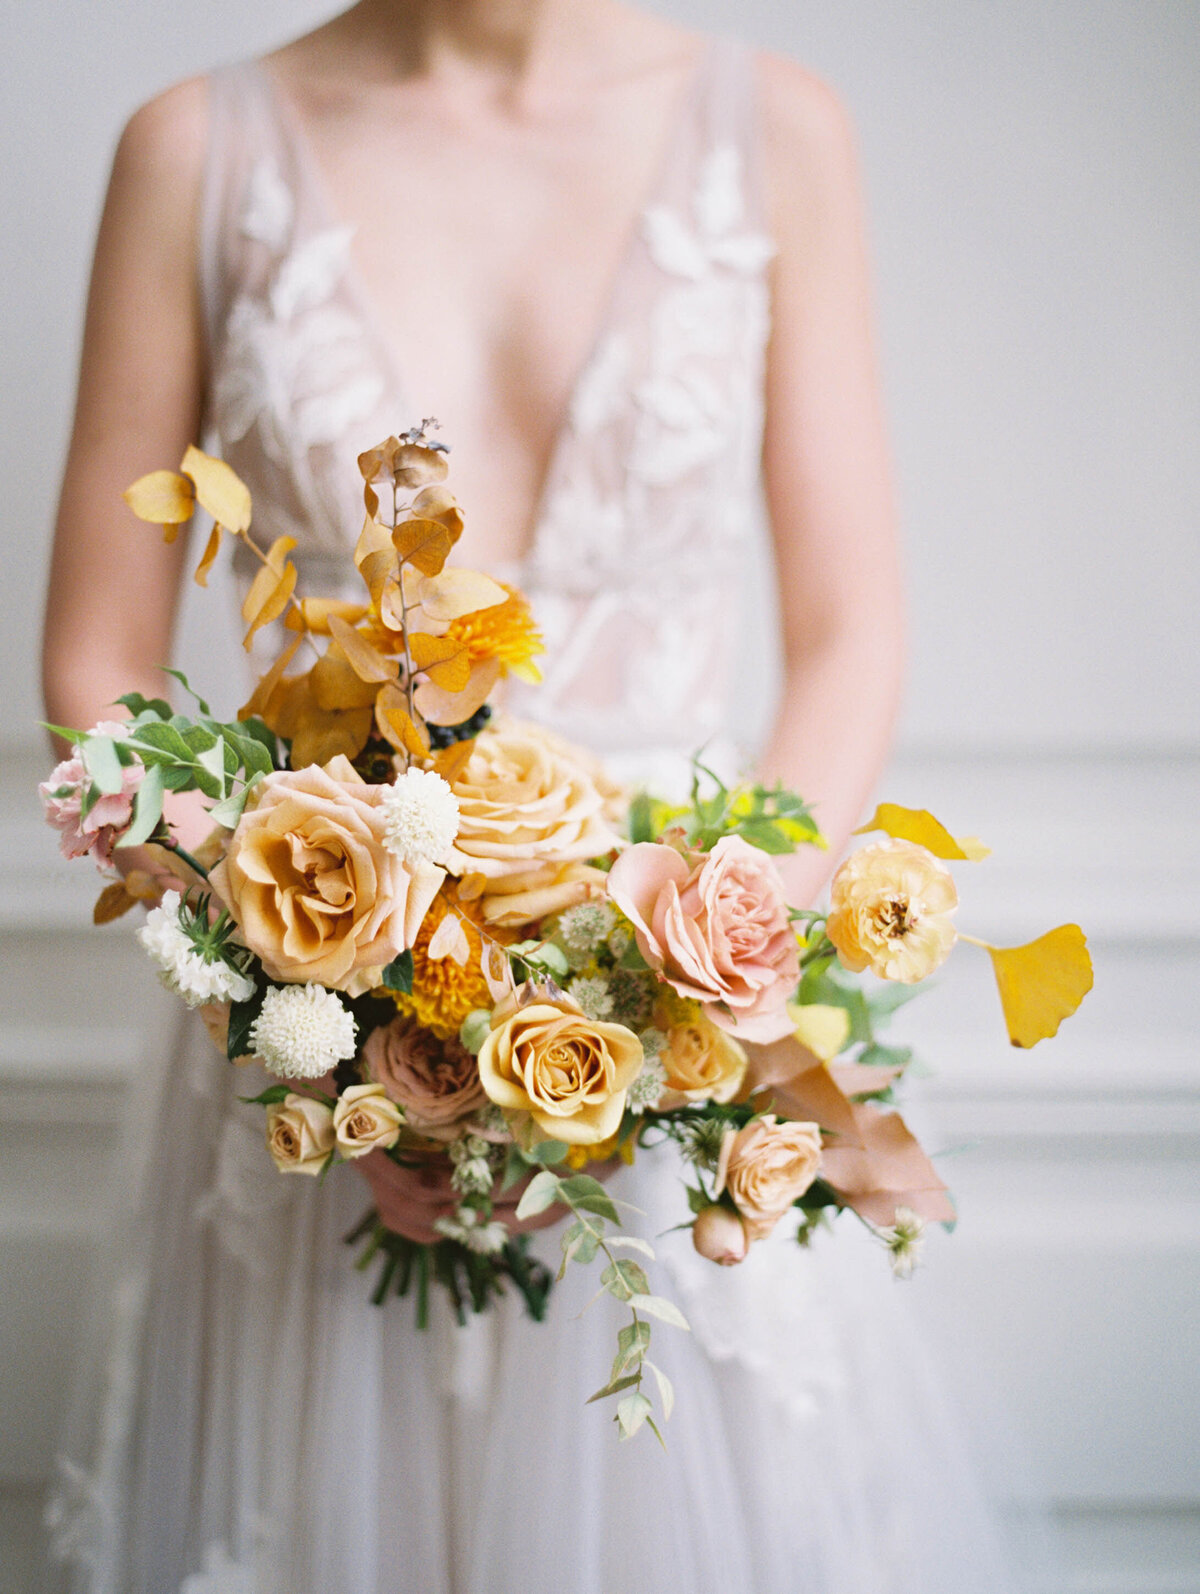 max-owens-design-yellow-wedding-flowers-02-bouquet-roses-gingko